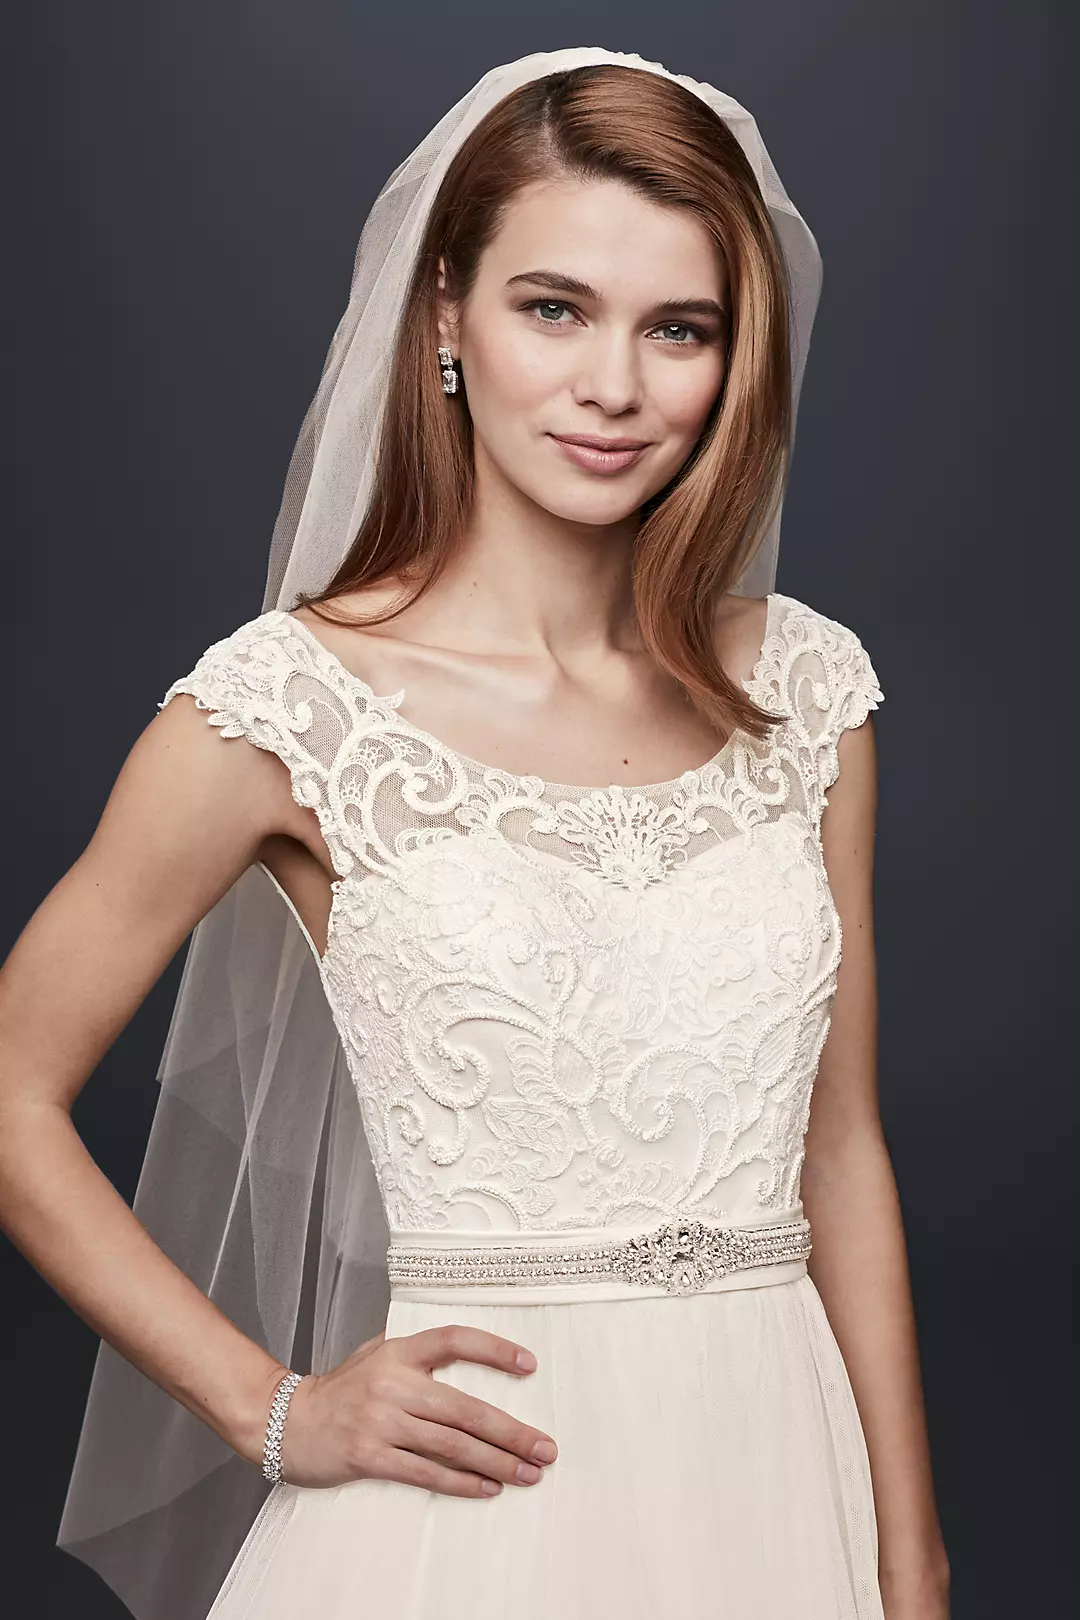 Tulle Wedding Dress with Lace Illusion Neckline Image 2